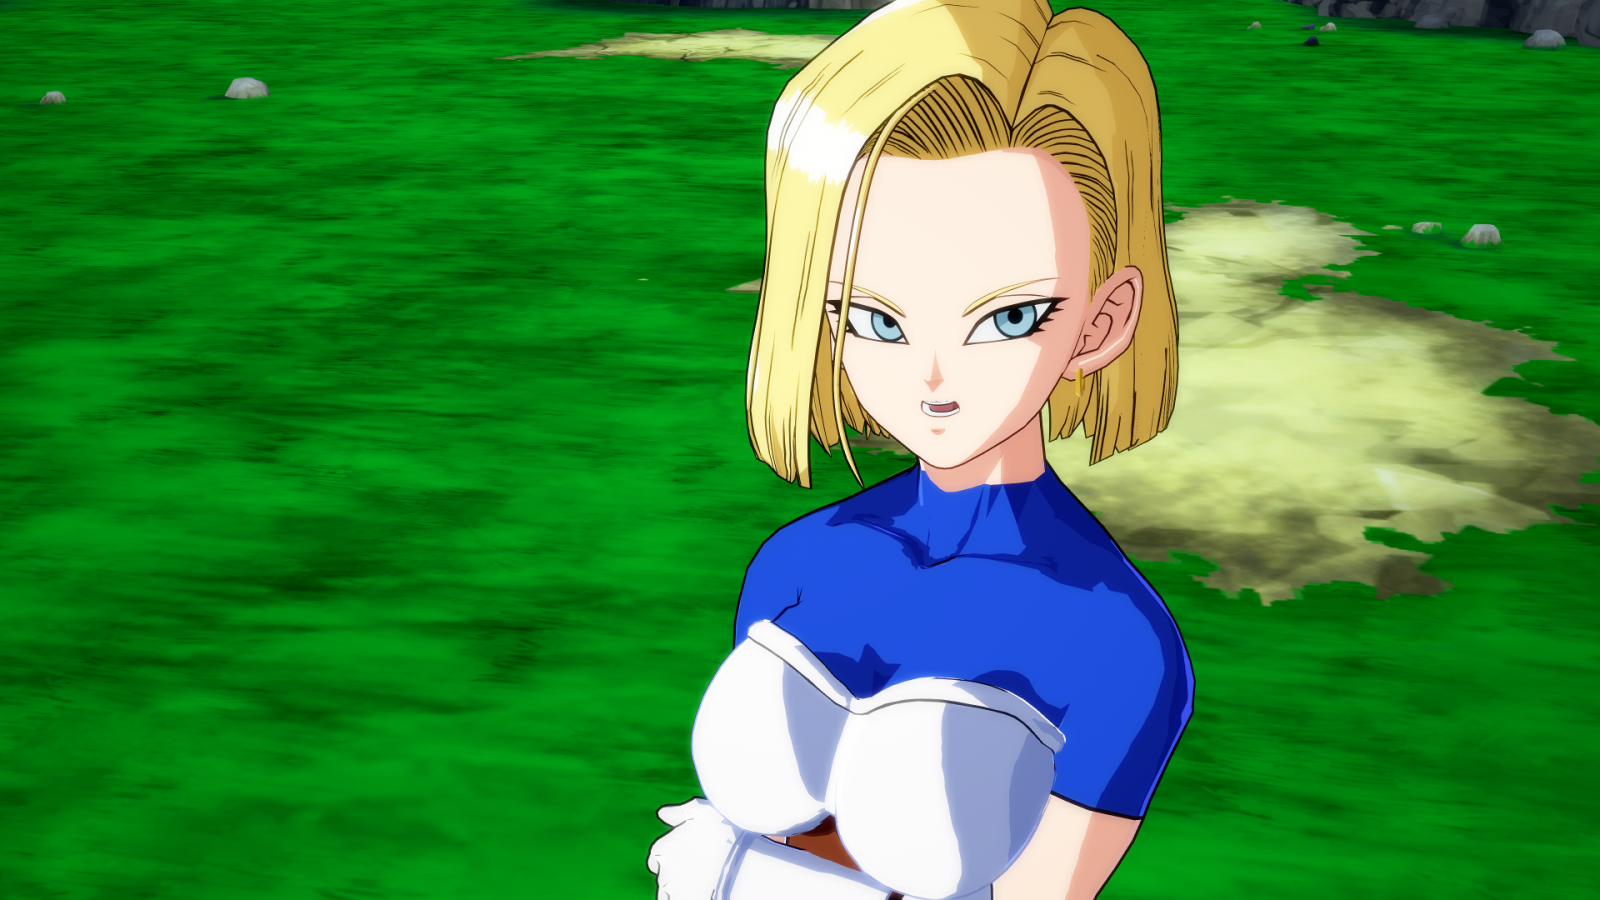 Someone wanted Android 18 in a Cheelai outfit more or less. 